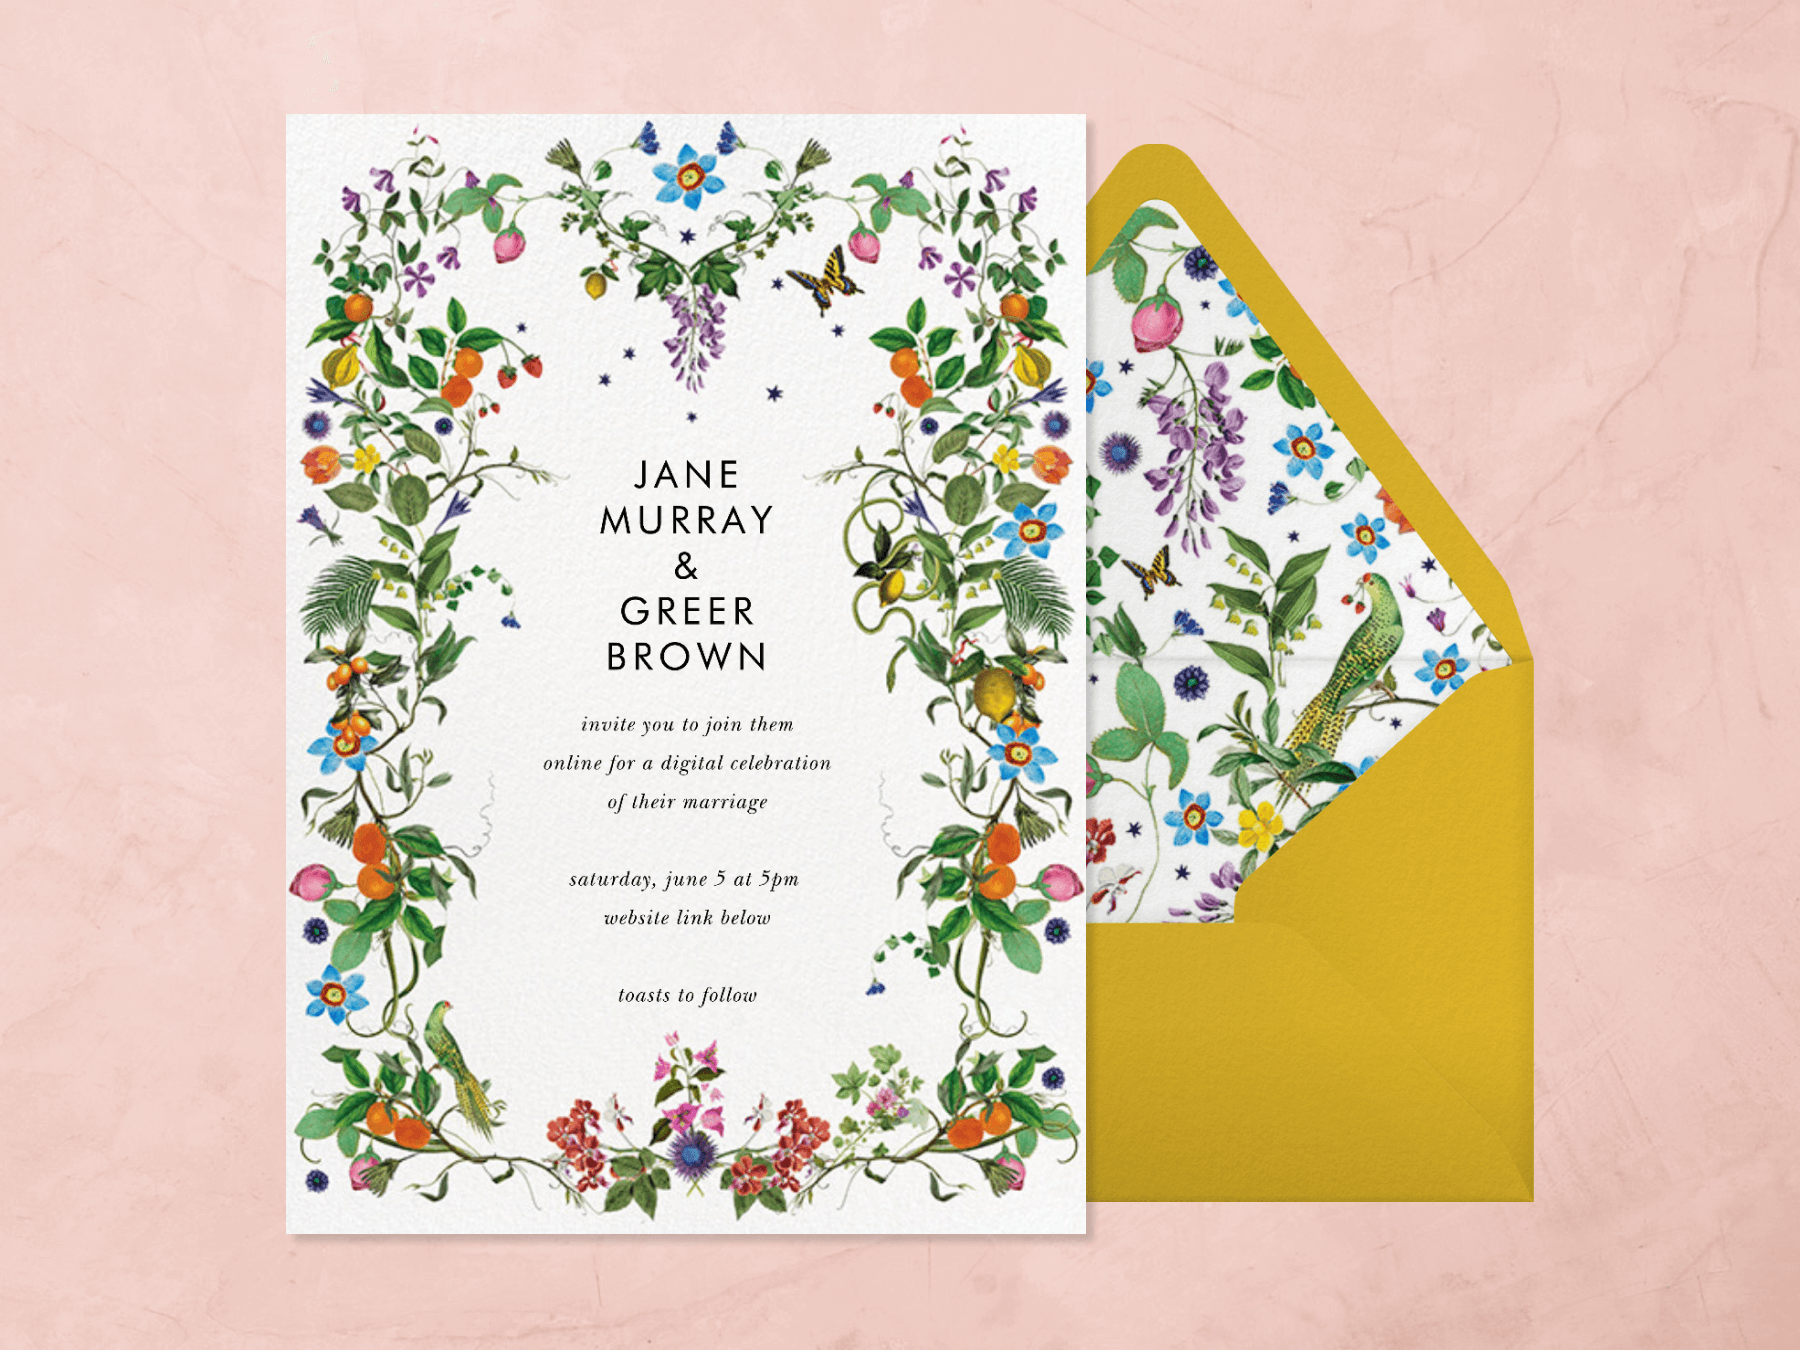 A wedding invitation with delicate yet ornate colorful flowers, fruit, and butterflies around the border.